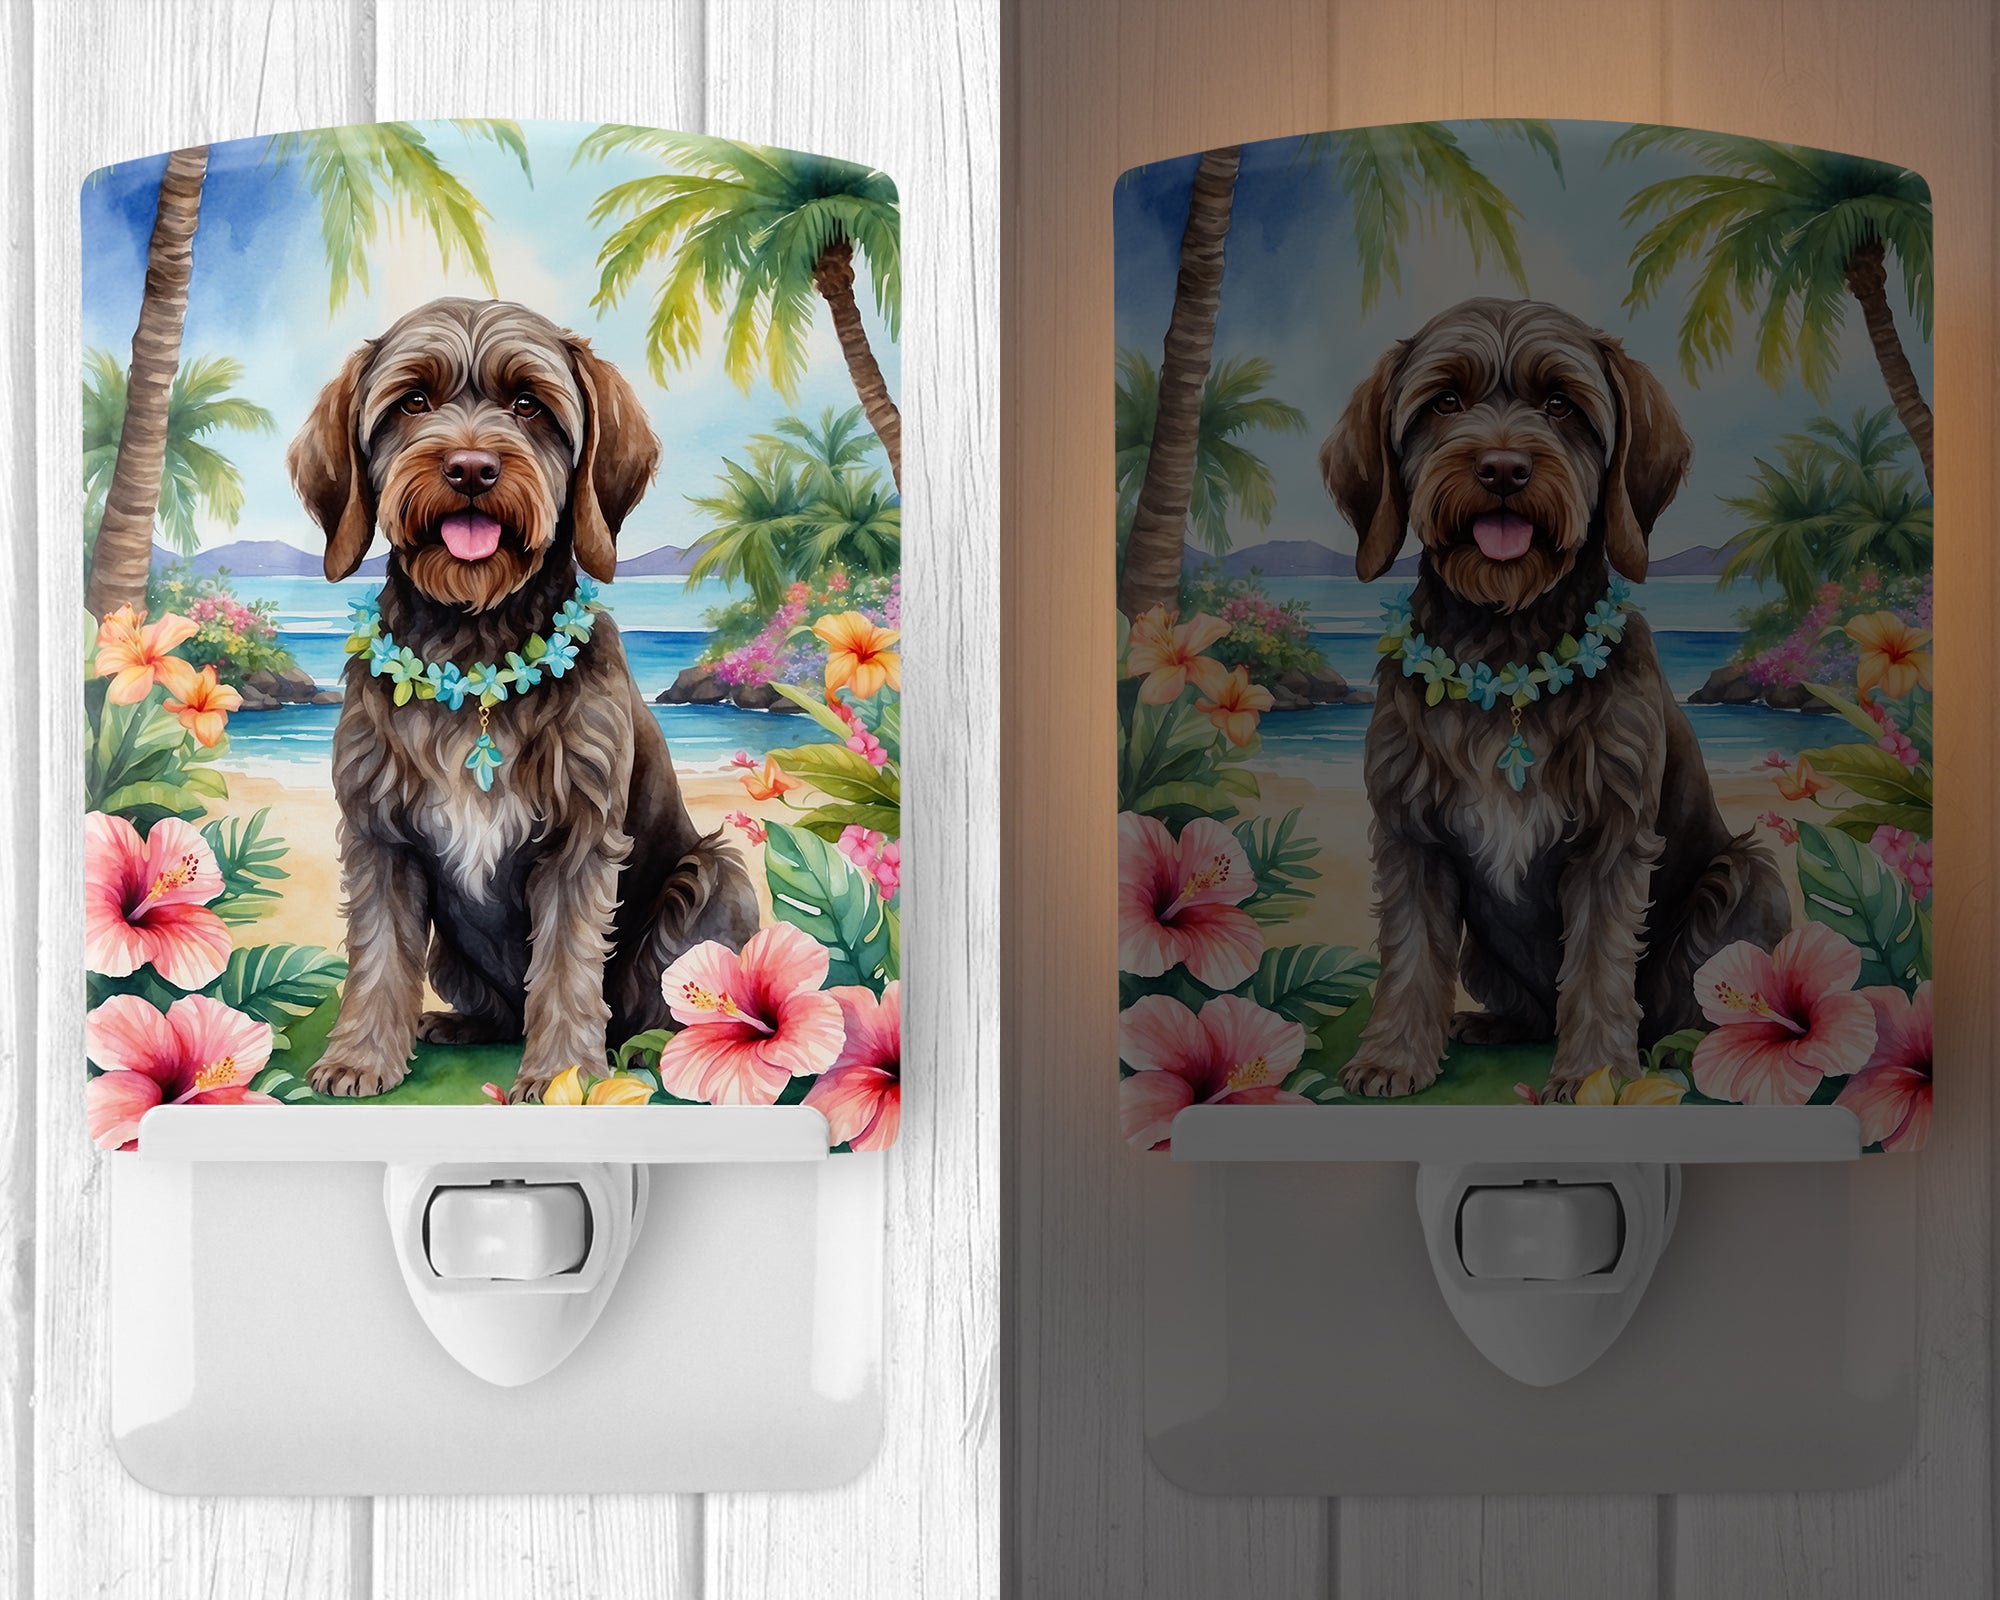 Buy this Wirehaired Pointing Griffon Luau Ceramic Night Light